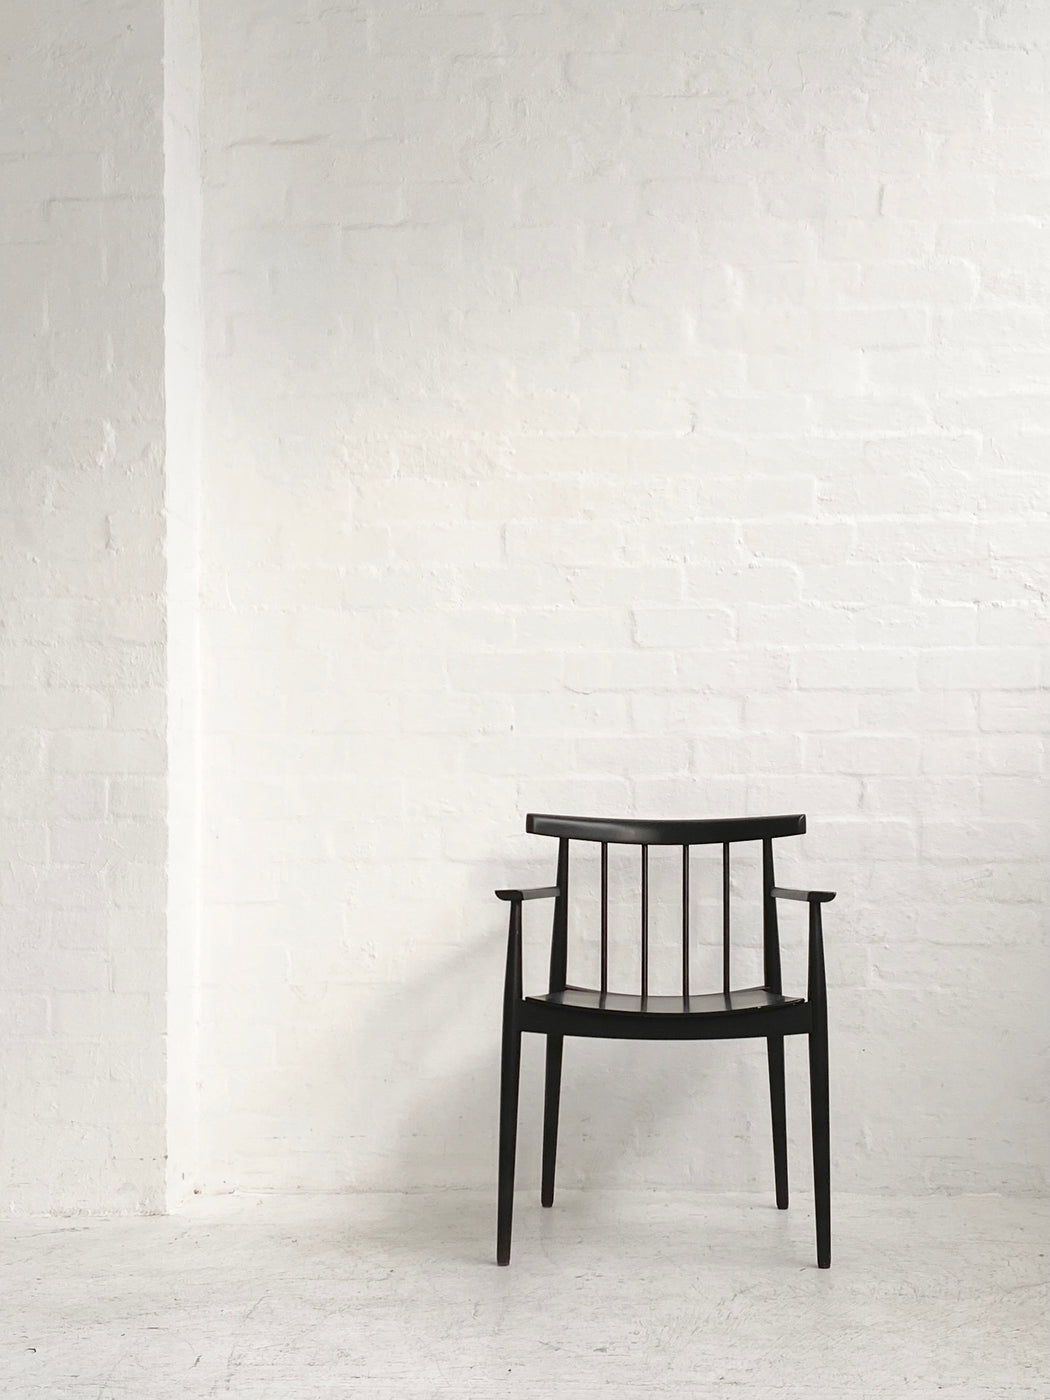 Lievore Altherr Molina ‘Smile’ Chair